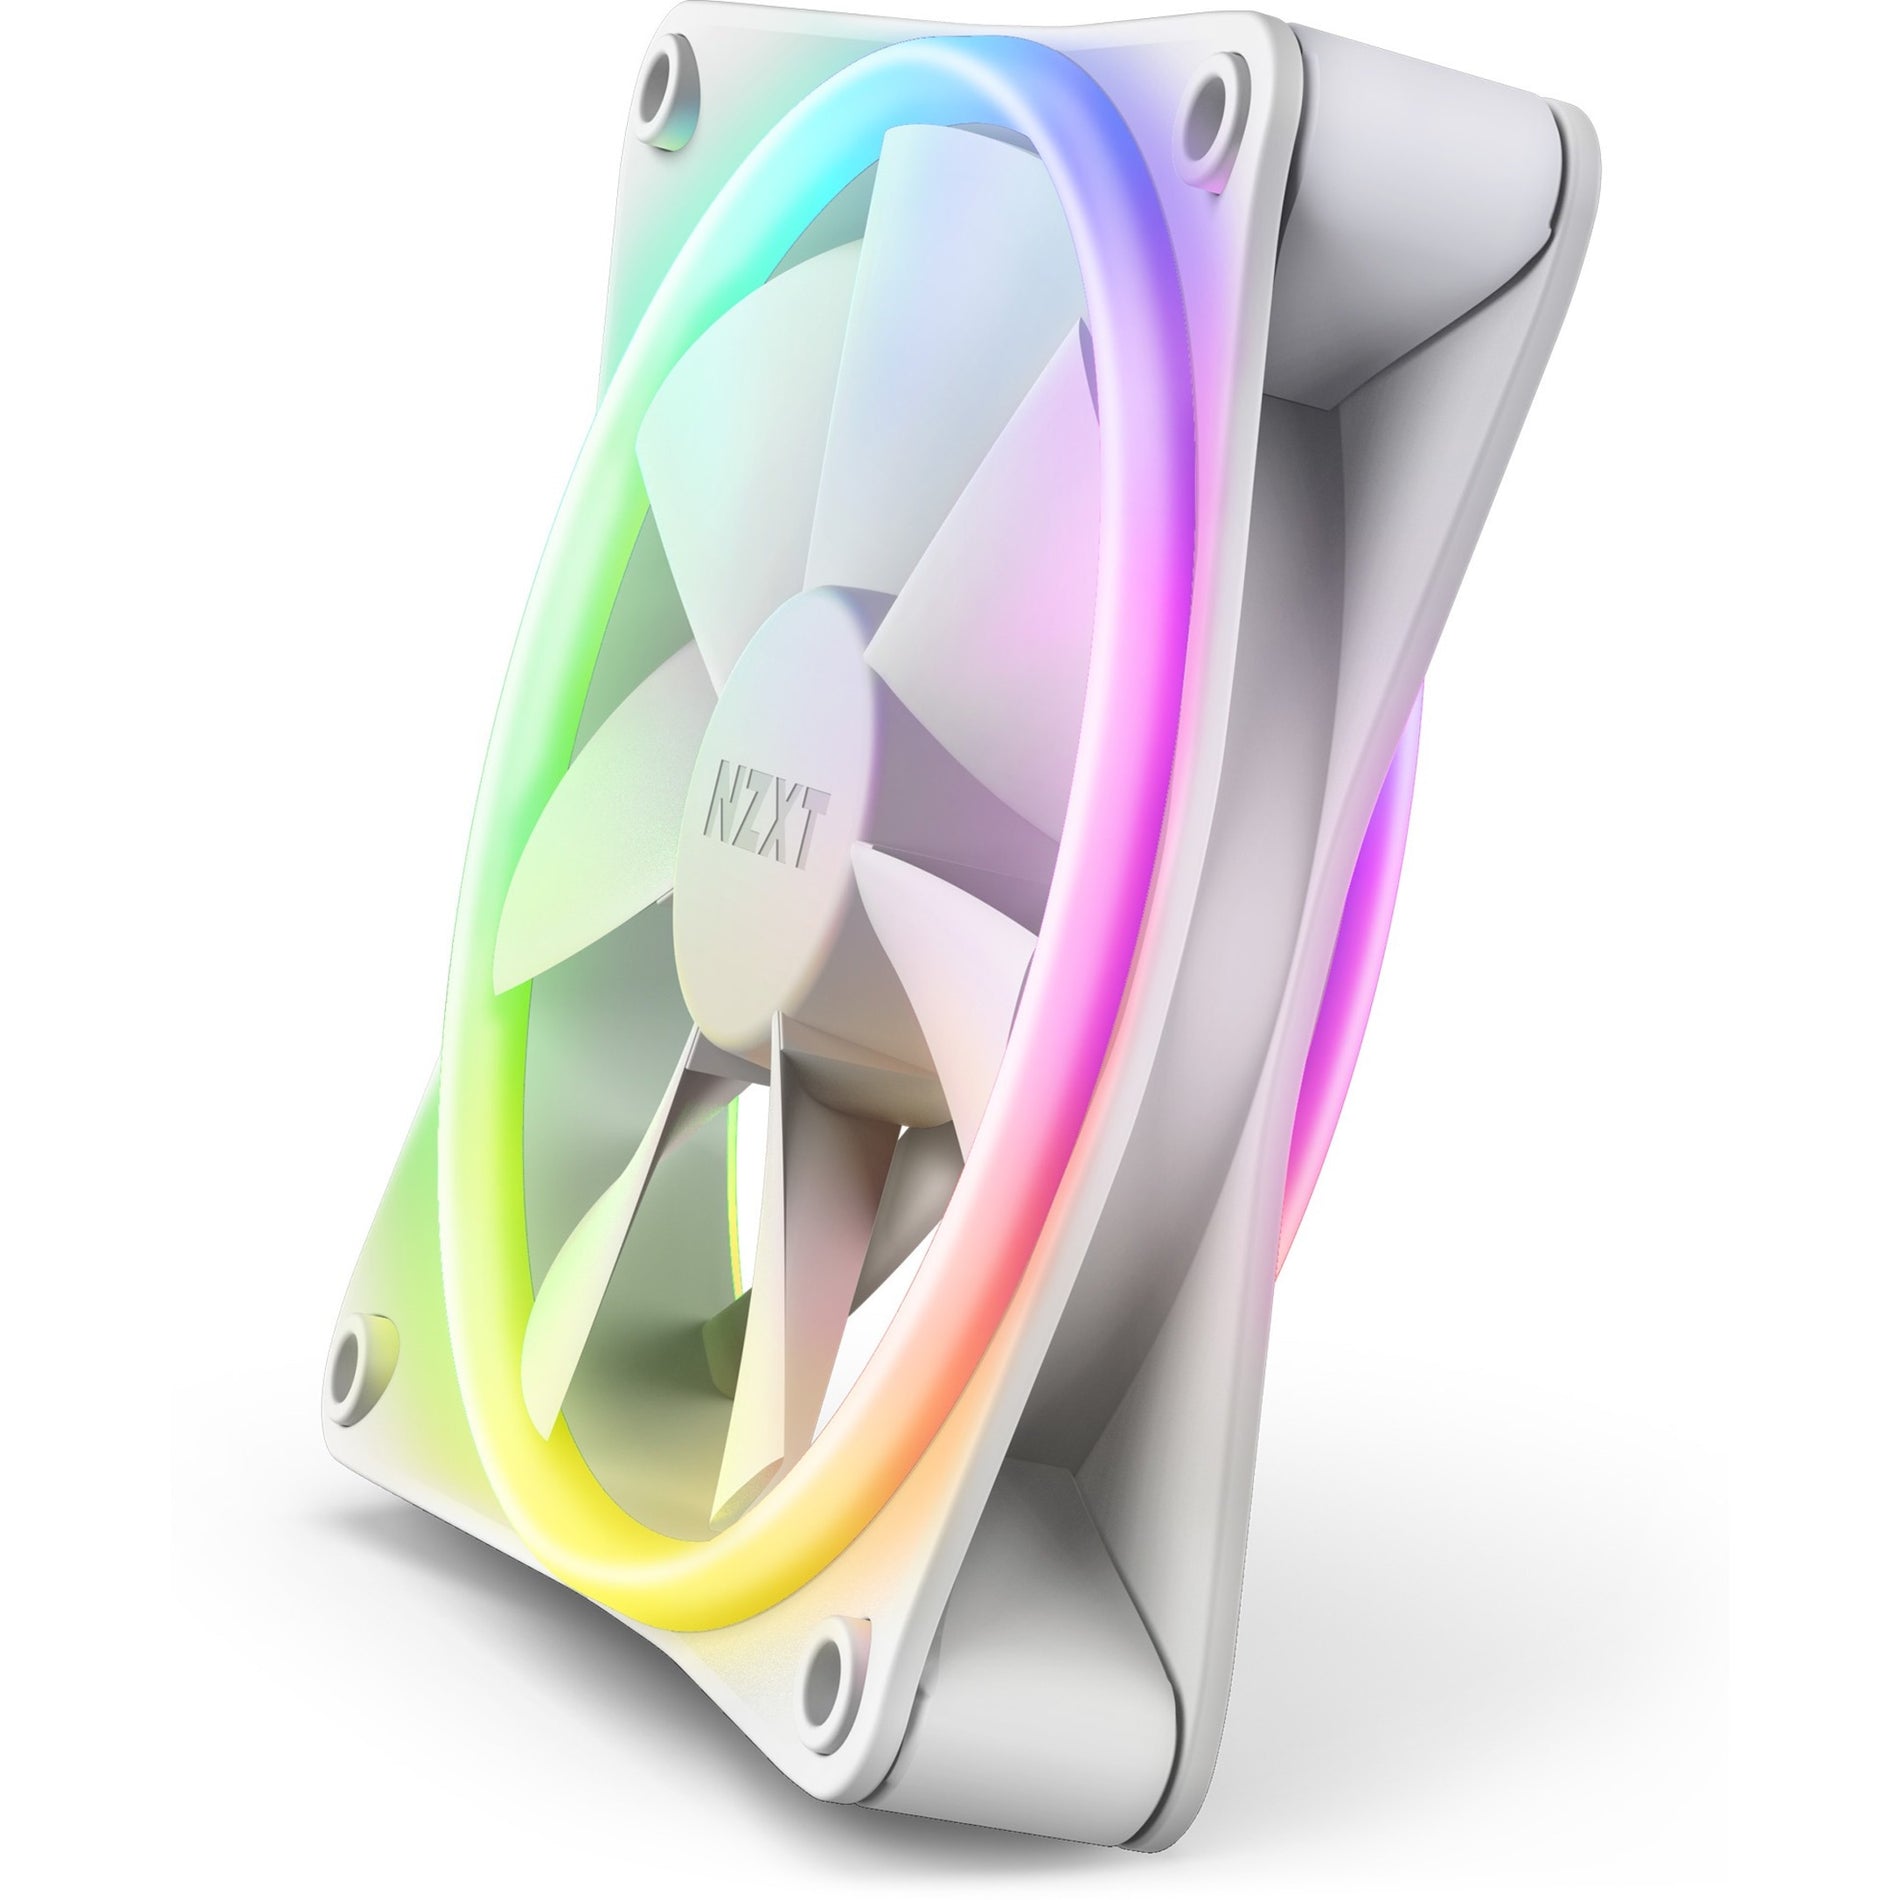 NZXT RF-D12TF-W1 F120 RGB DUO Cooling Fan - 3 Pack, Quiet and Colorful Cooling Solution